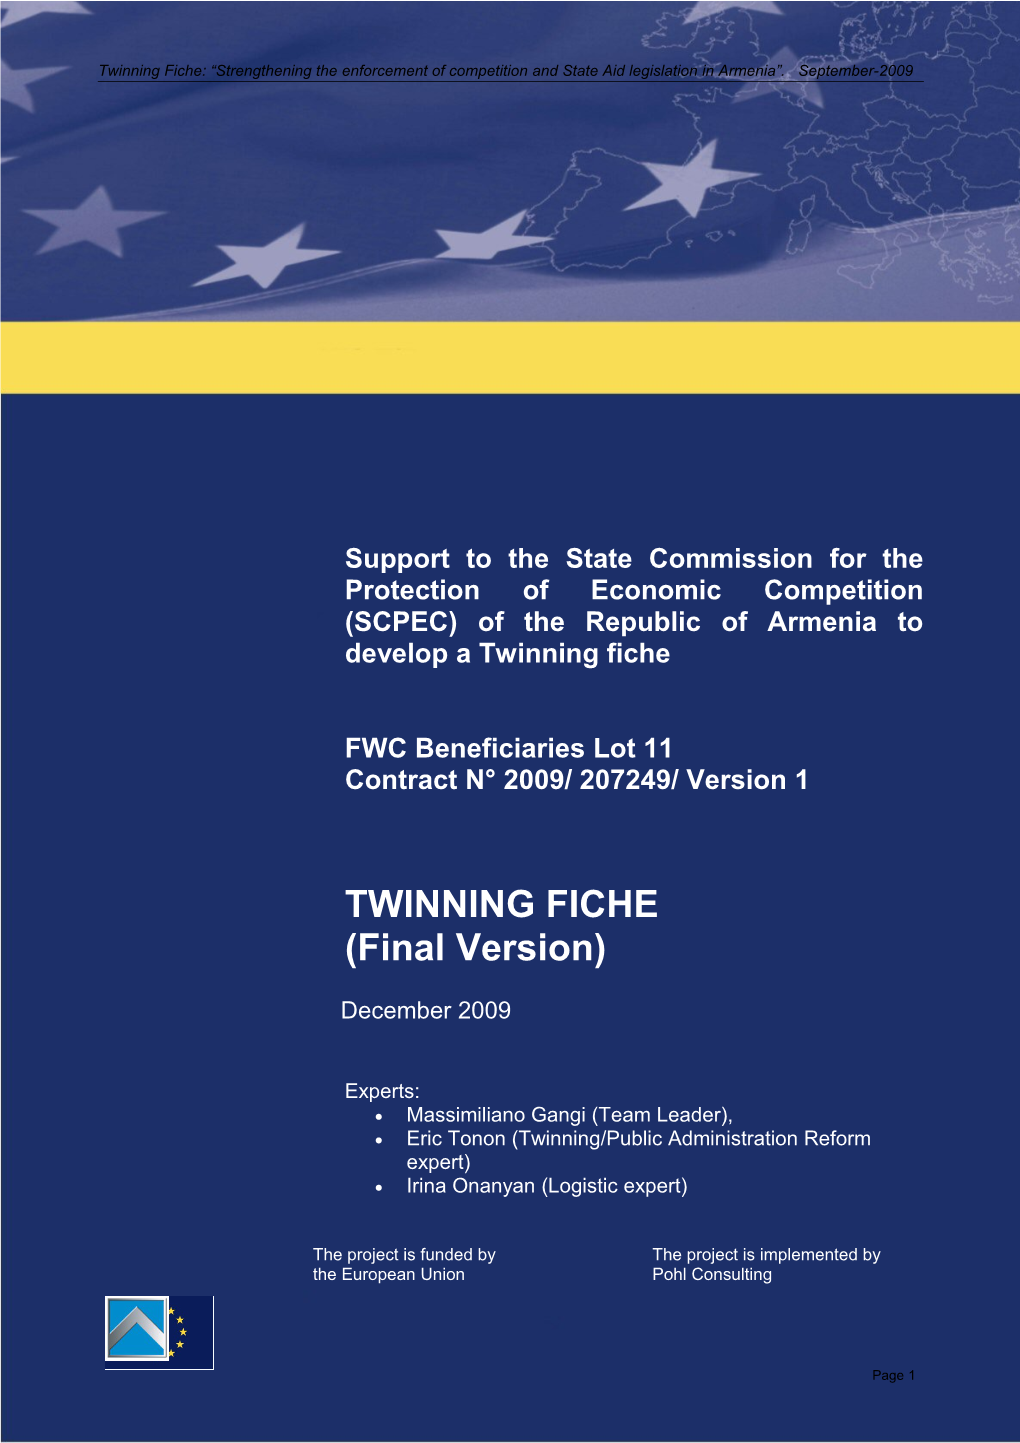 Support to the State Commission for the Protection of Economic Competition (SCPEC) Of